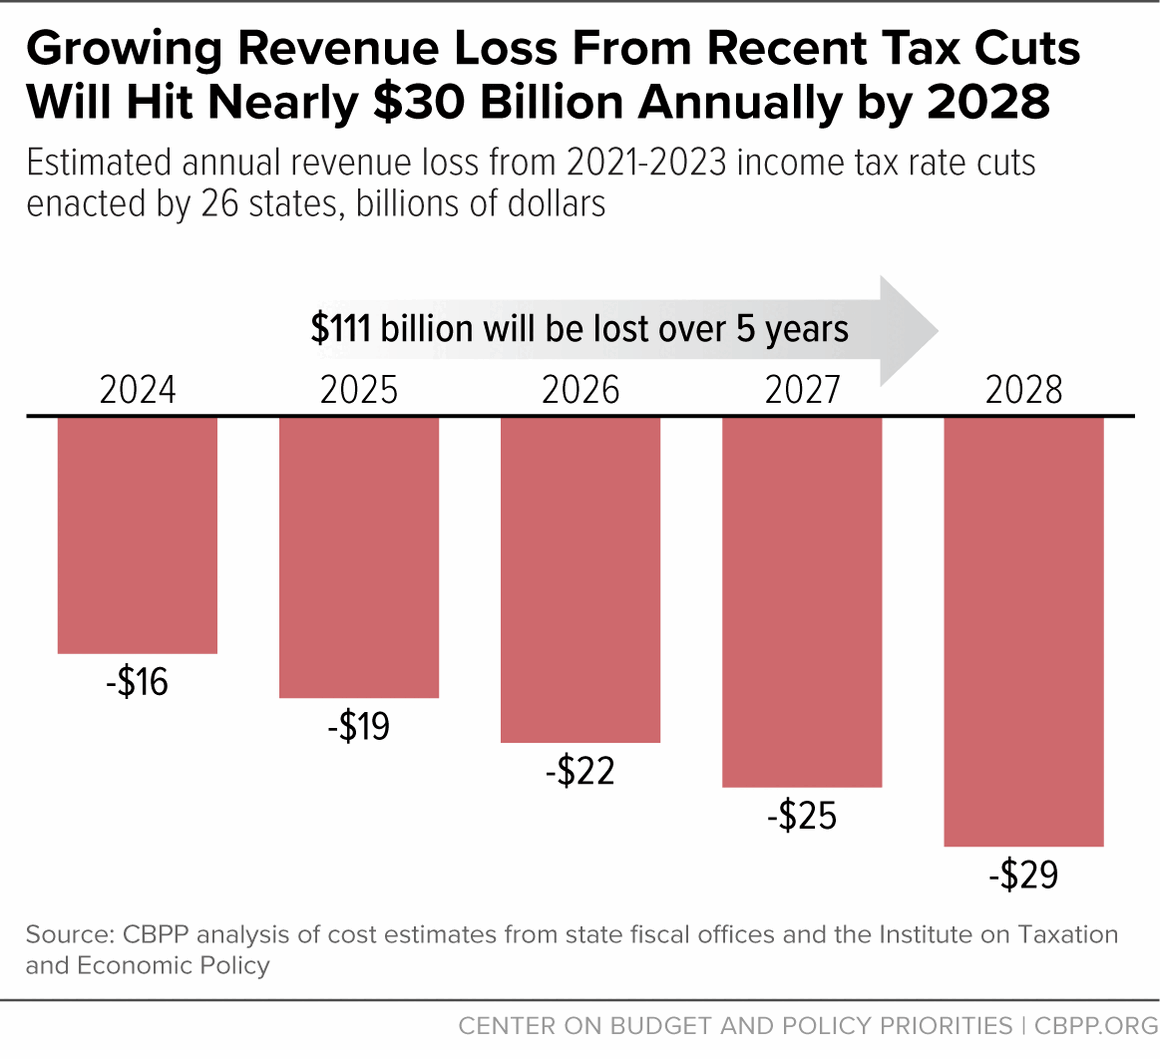 Growing Revenue Loss From Recent Tax Cuts Will Hit Nearly $30 Billion Annually by 2028